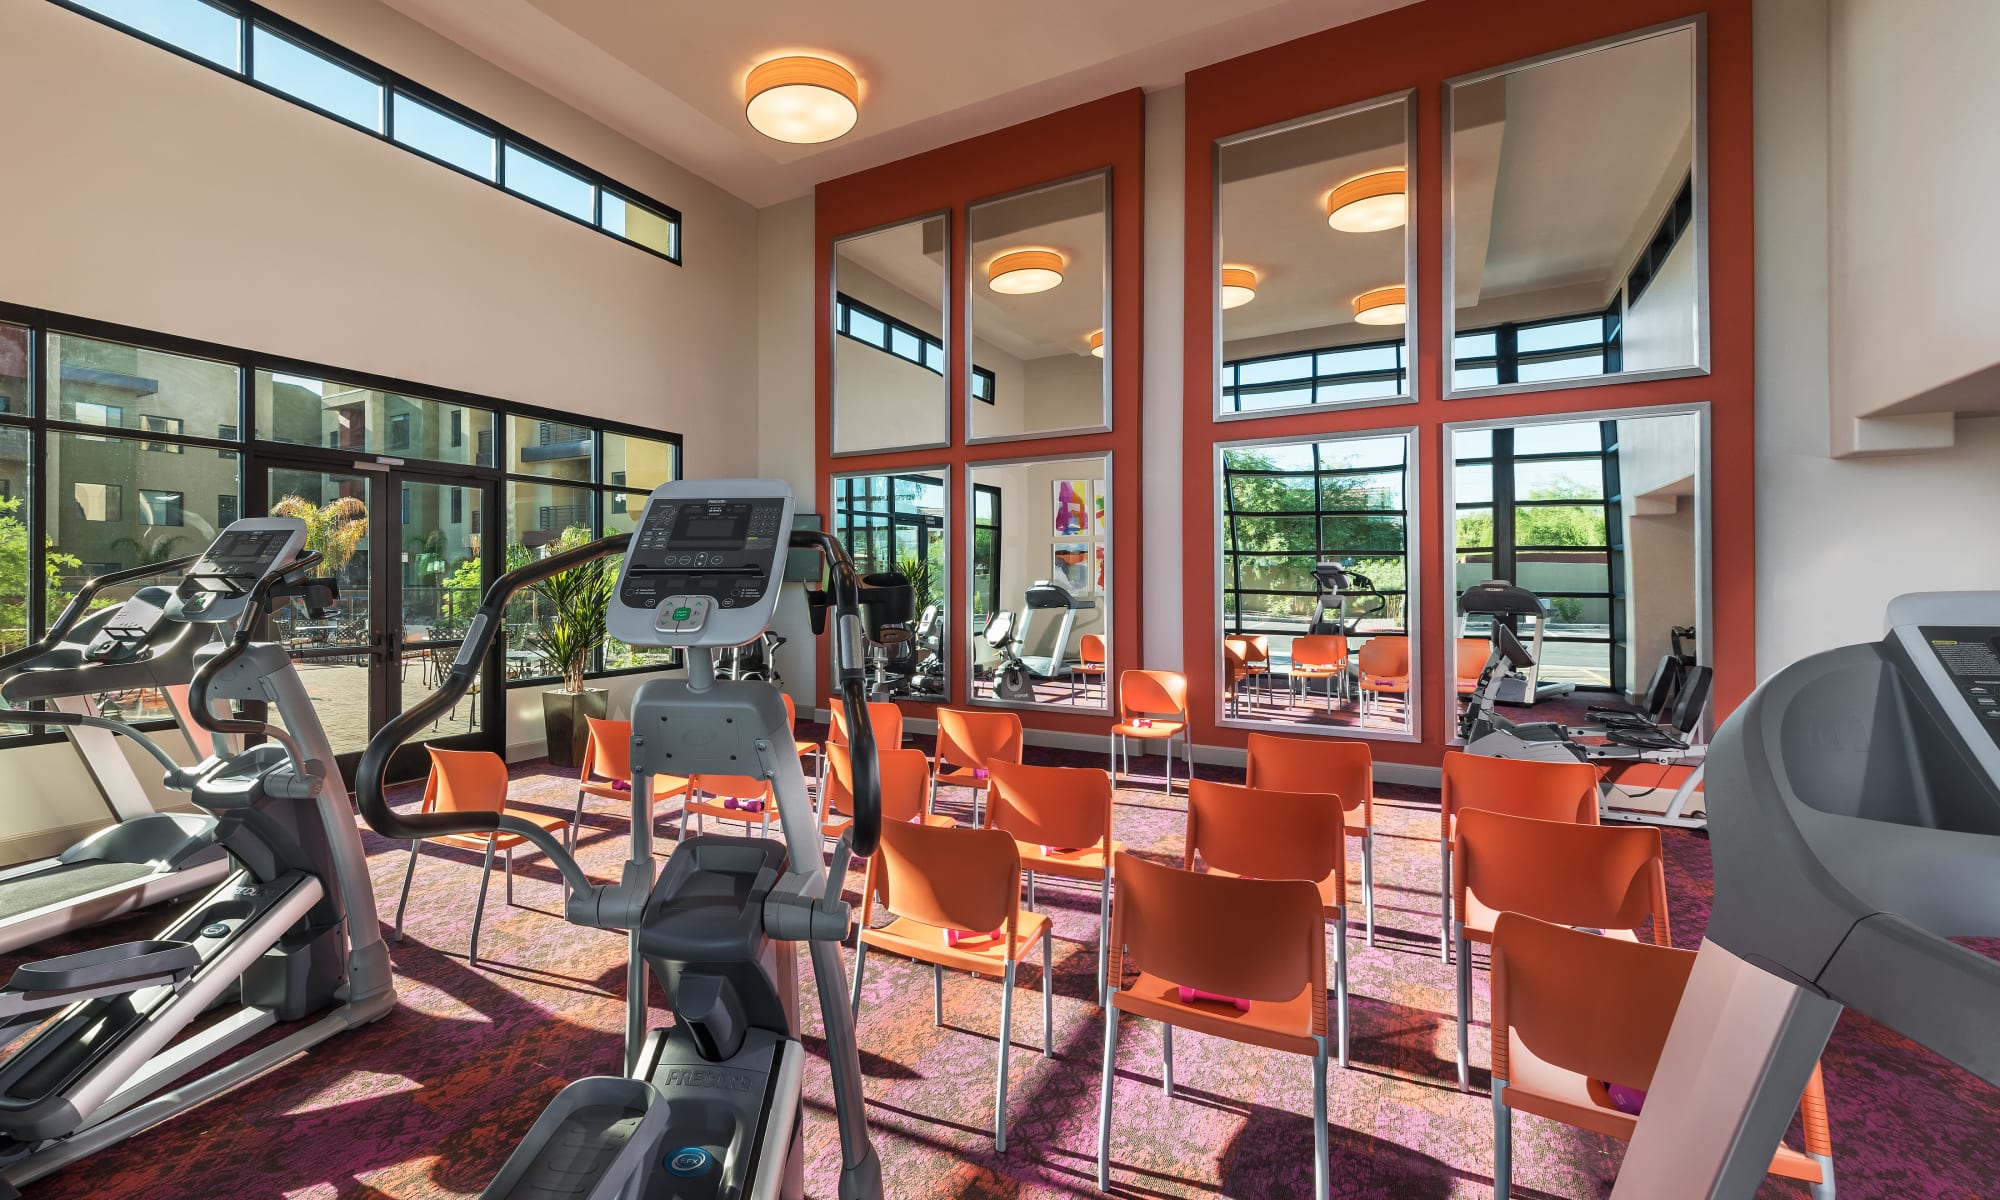 Fitness center at Clearwater Ahwatukee in Phoenix, Arizona